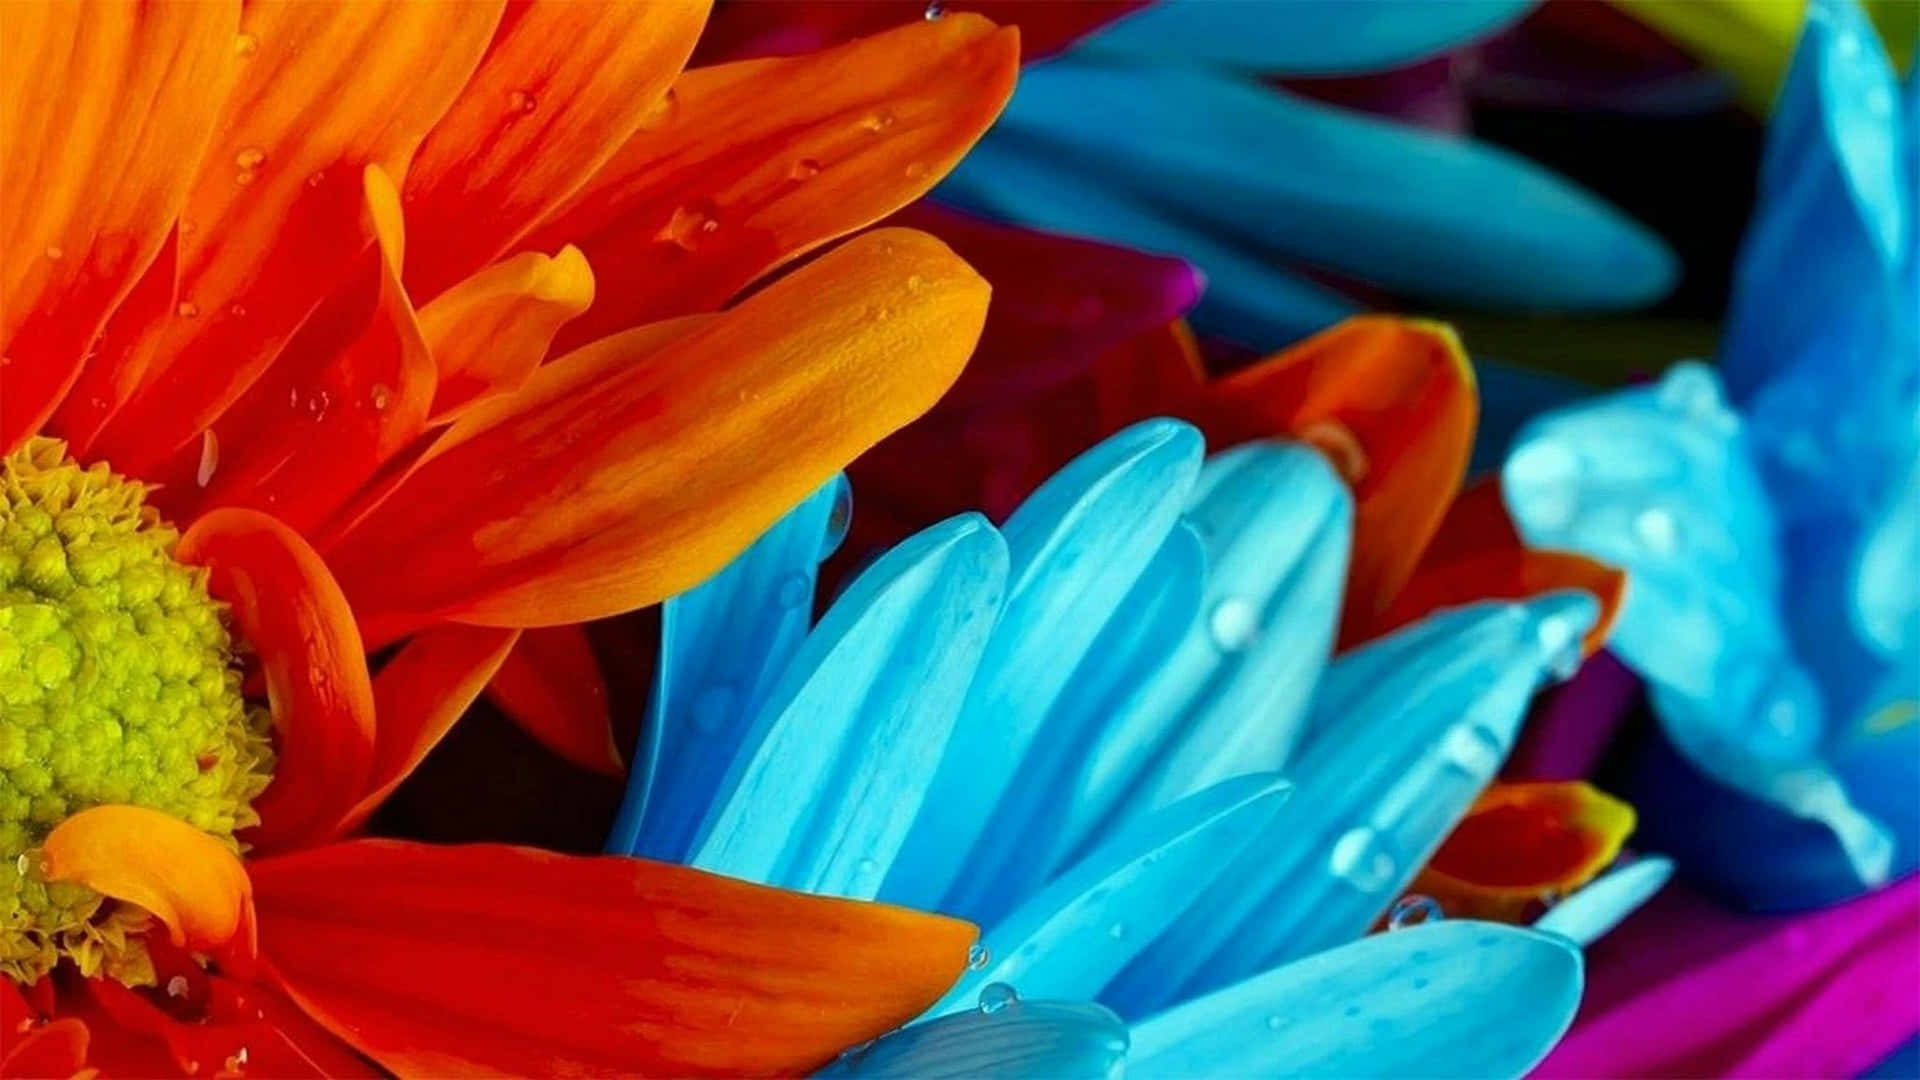 Download Mesmerizing Colorful Flowers in Full Bloom Wallpaper ...